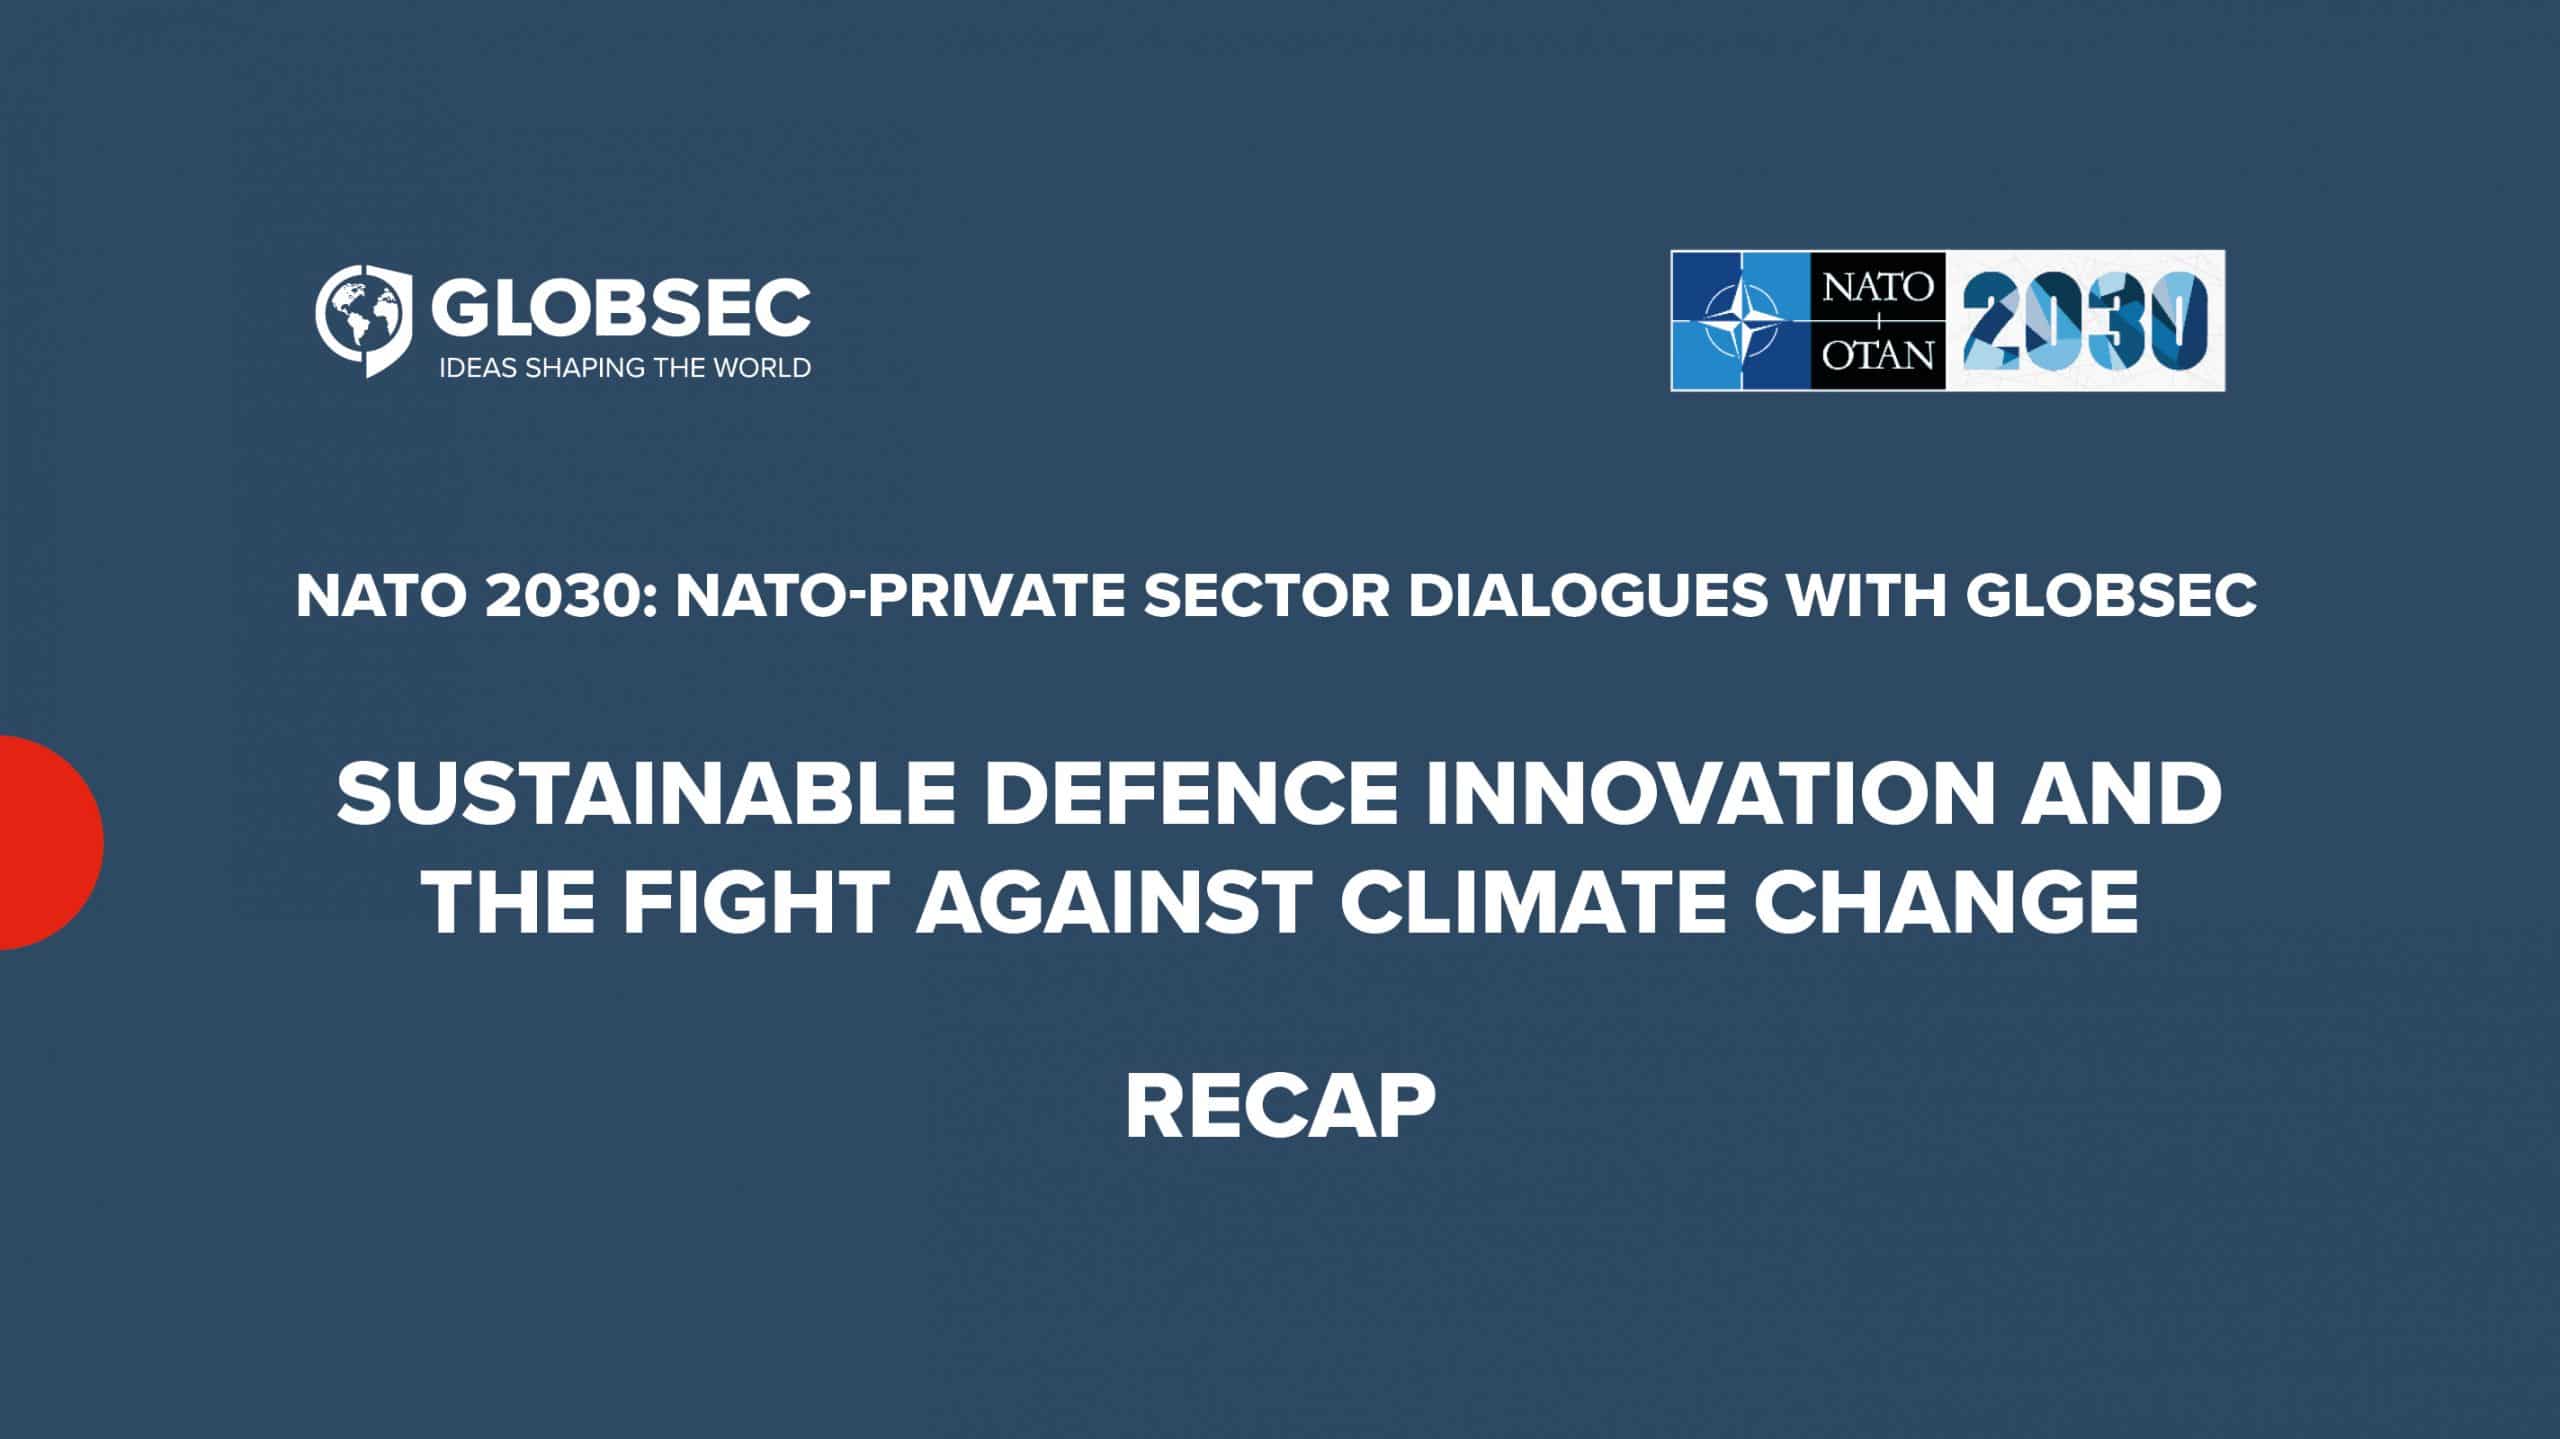 Sustainable Defence Innovation and the Fight Against Climate Change: Recap